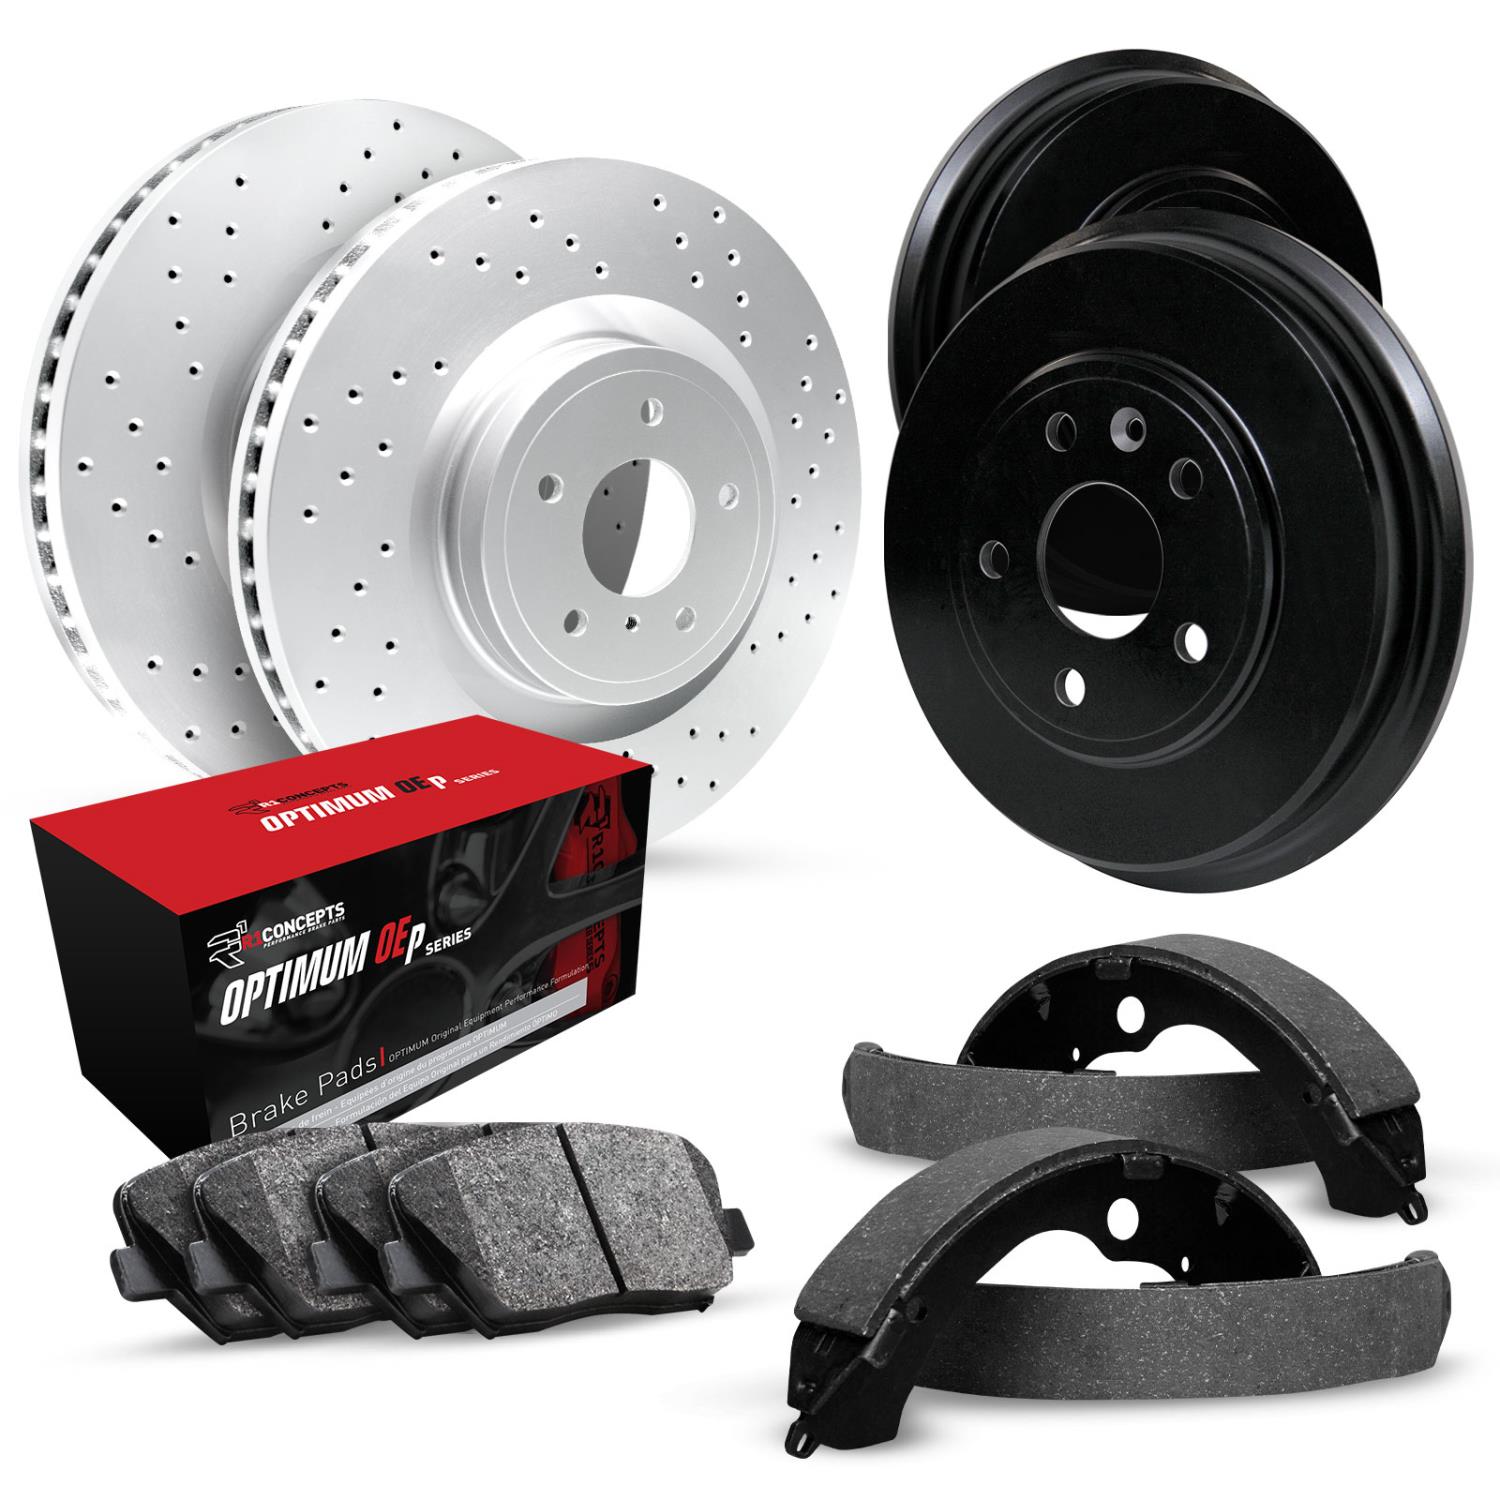 GEO-Carbon Drilled Brake Rotor & Drum Set w/Optimum OE Pads & Shoes, 1990-1991 Infiniti/Nissan, Position: Front & Rear